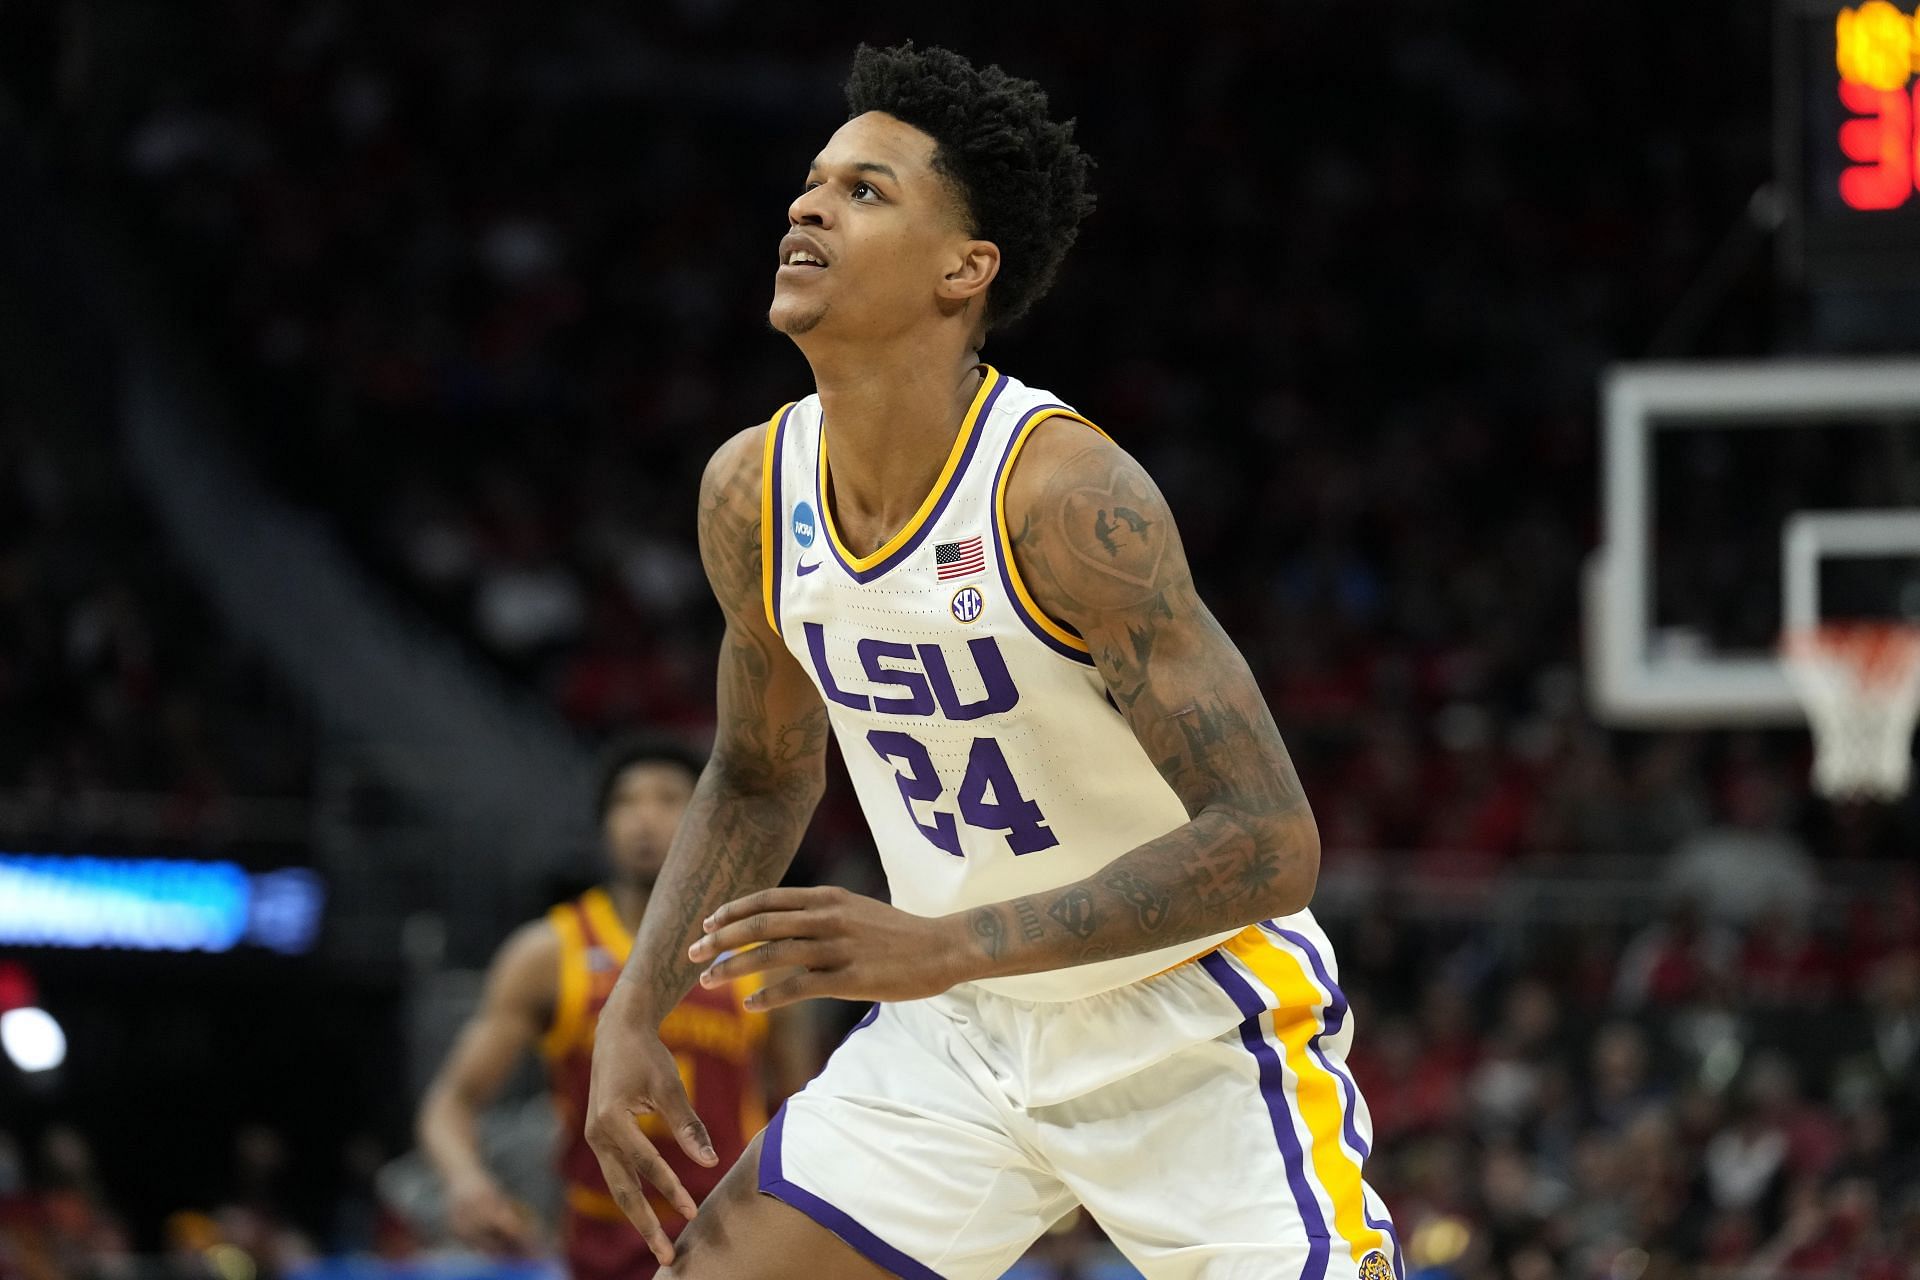 Shaq&#039;s son Shareef O&#039;Neal was part of the LSU Tigers in the 2022 NCAA tournament.